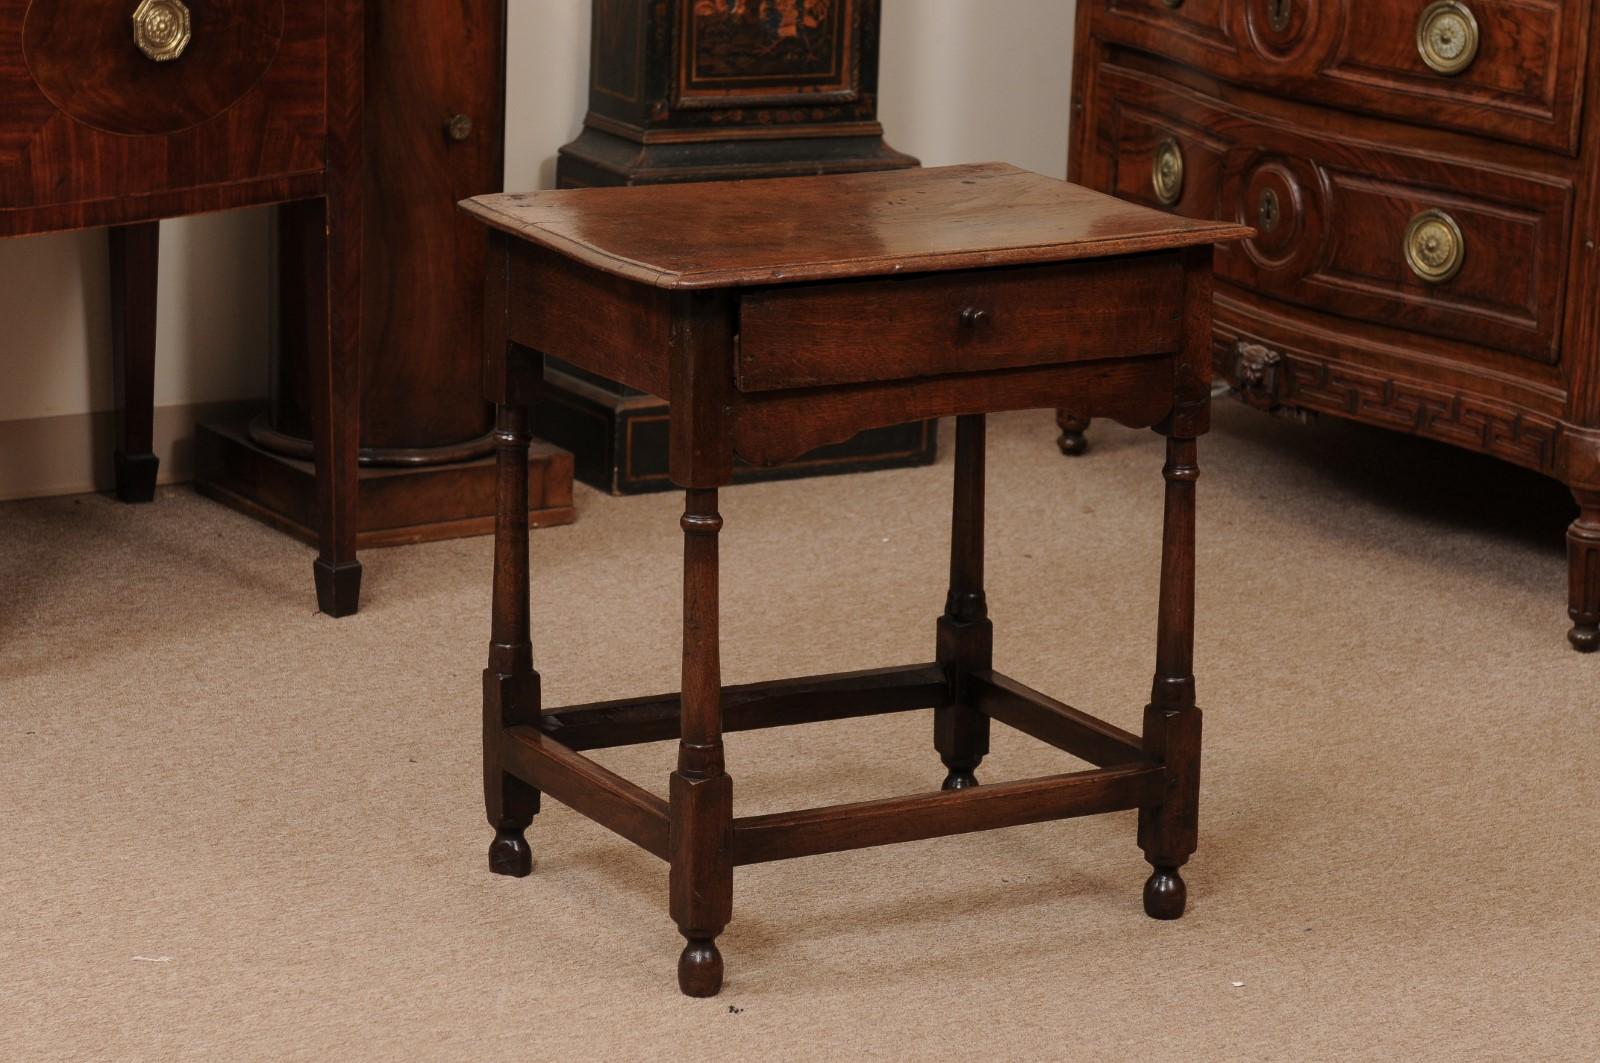 English Small 18th Century Oak Side Table with Drawer, Turned Legs Joined by Box Stretcher